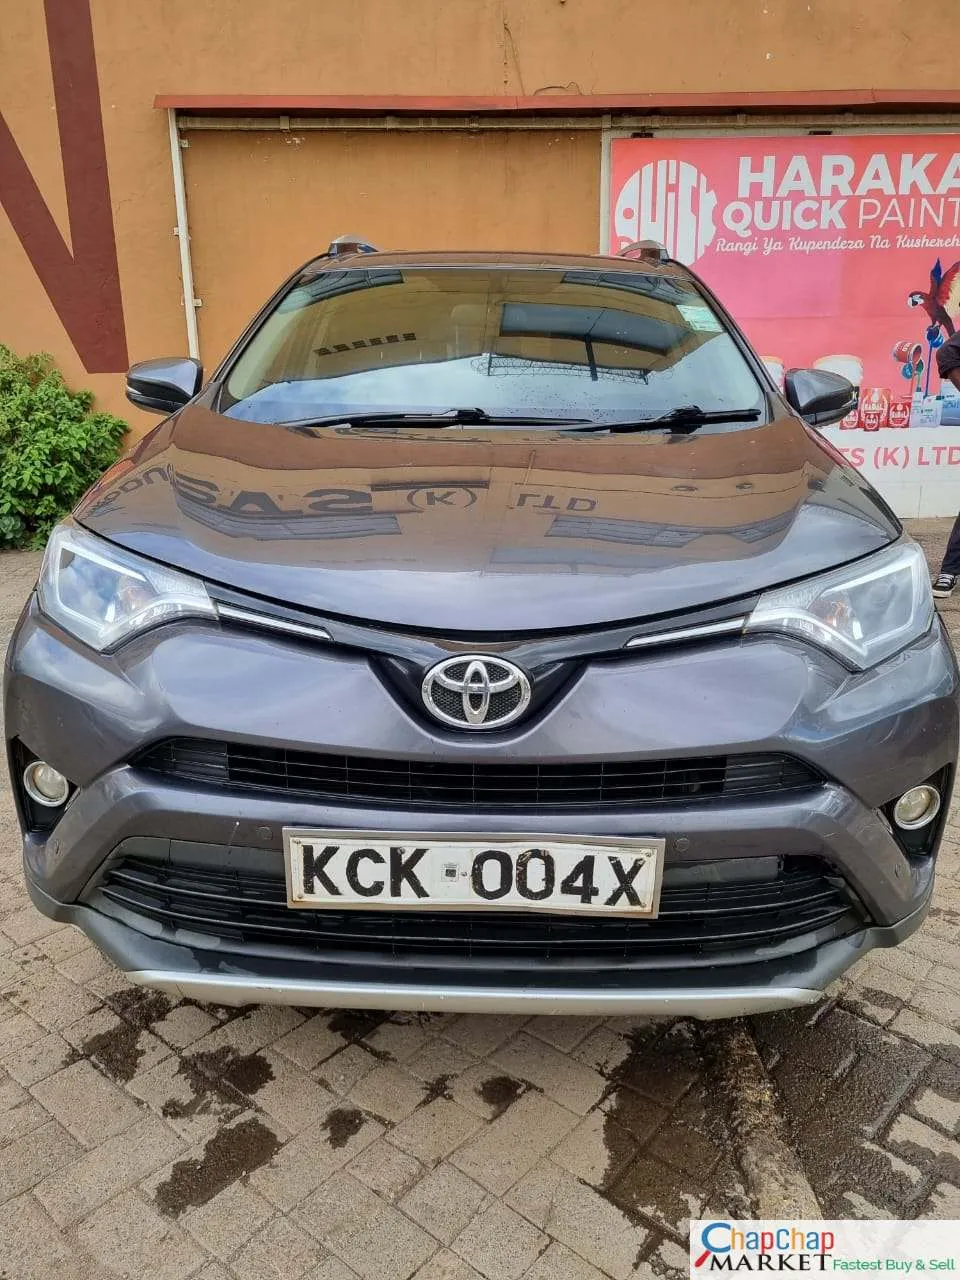 Toyota RAV4 locally assembled CHEAPEST New shape Rav4 For sale in kenya hire purchase installments You Pay 30% Deposit Trade in OK EXCLUSIVE